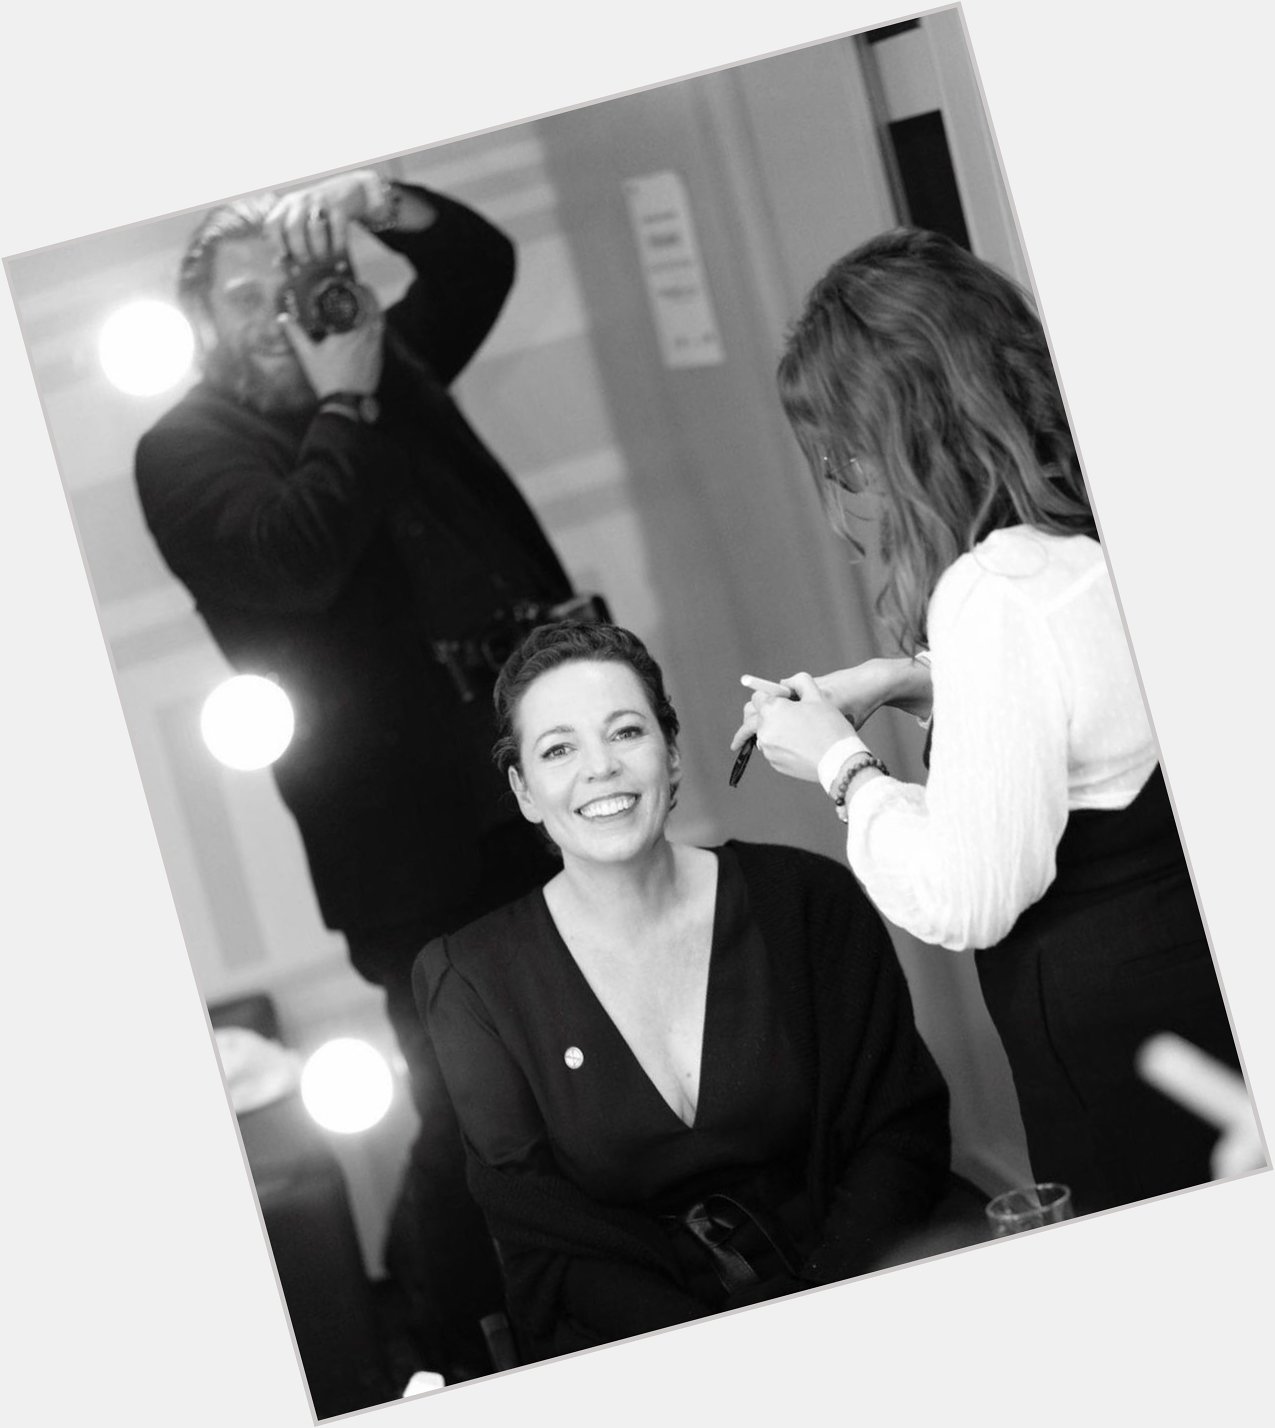 Happy birthday to one of the greatest ever, olivia colman<33 